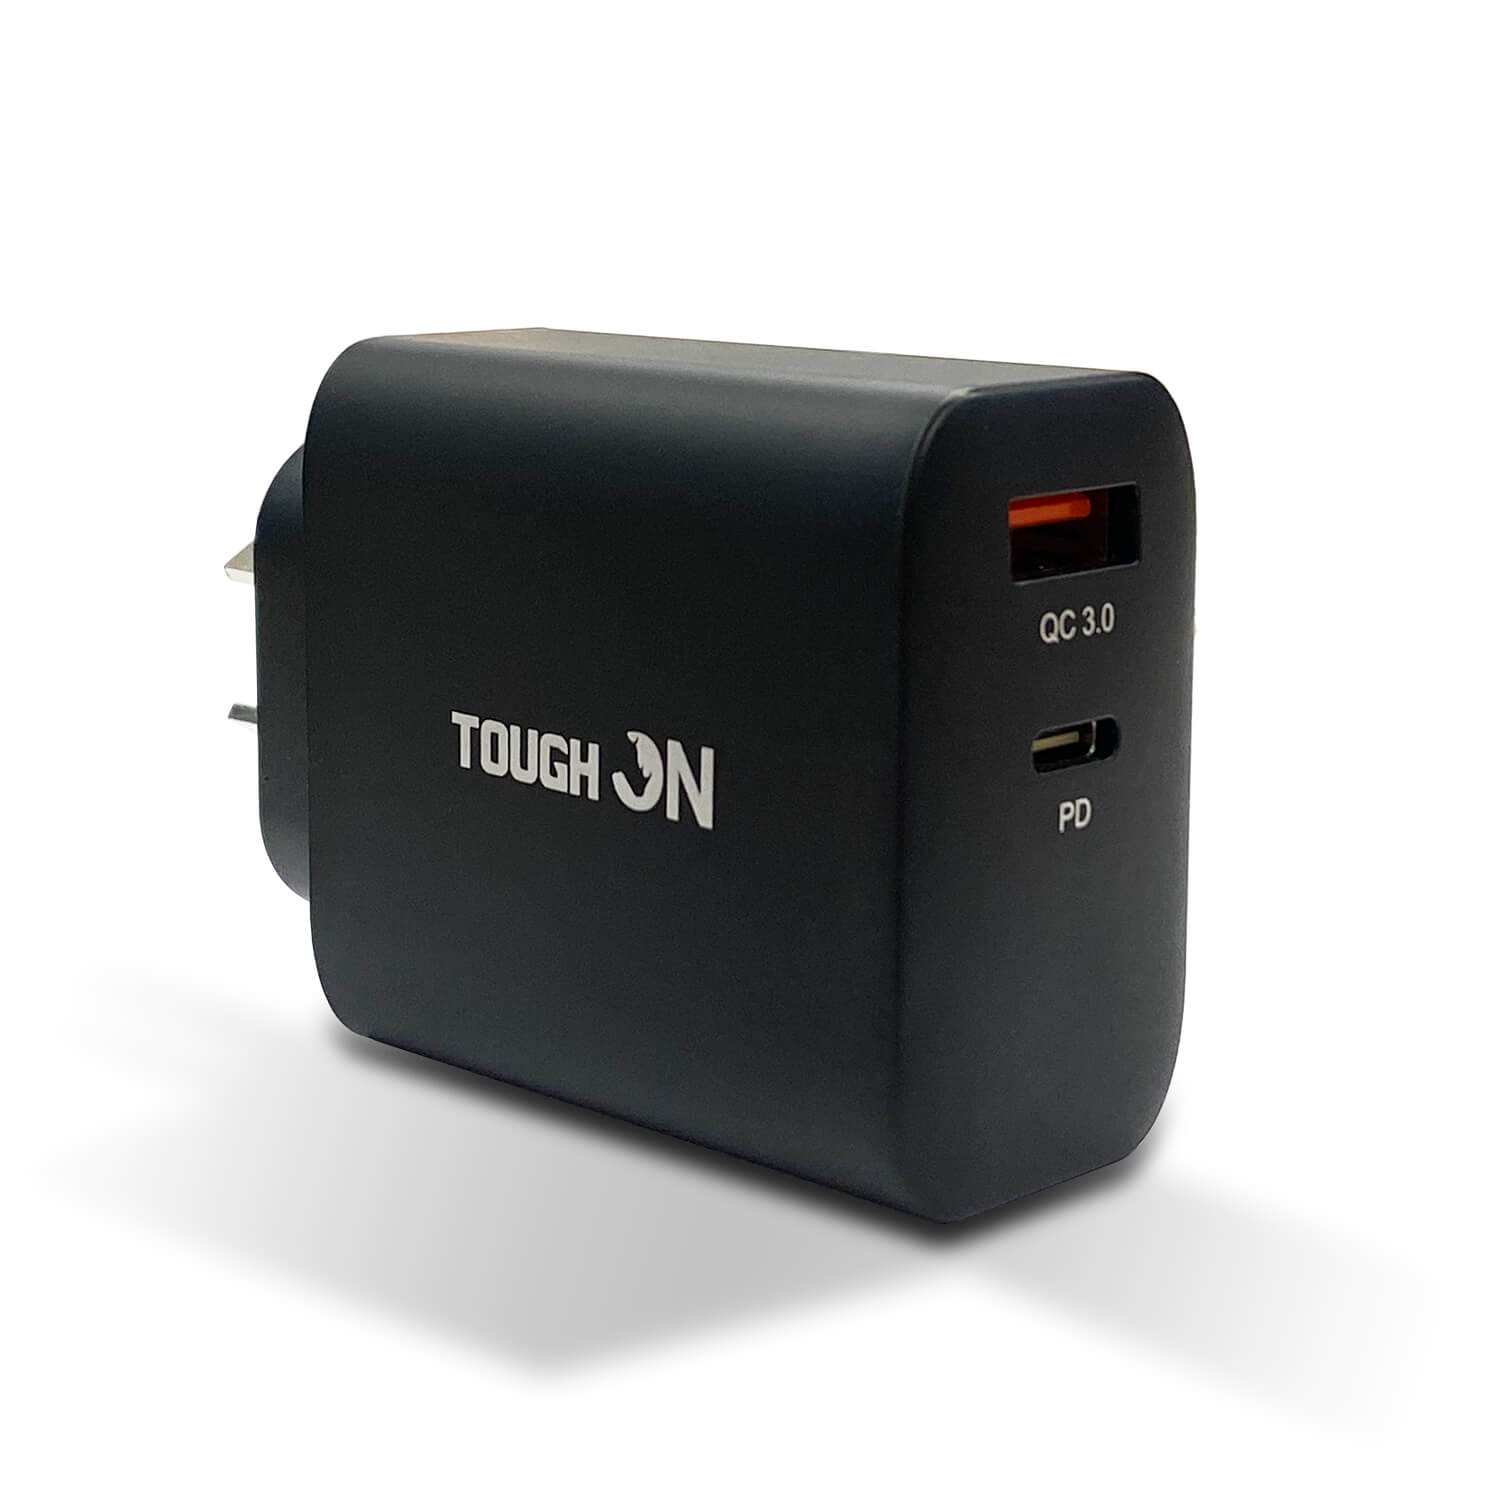 Tough on 65W Gan Dual Port PD & QC 3.0 Fast Wall Charger